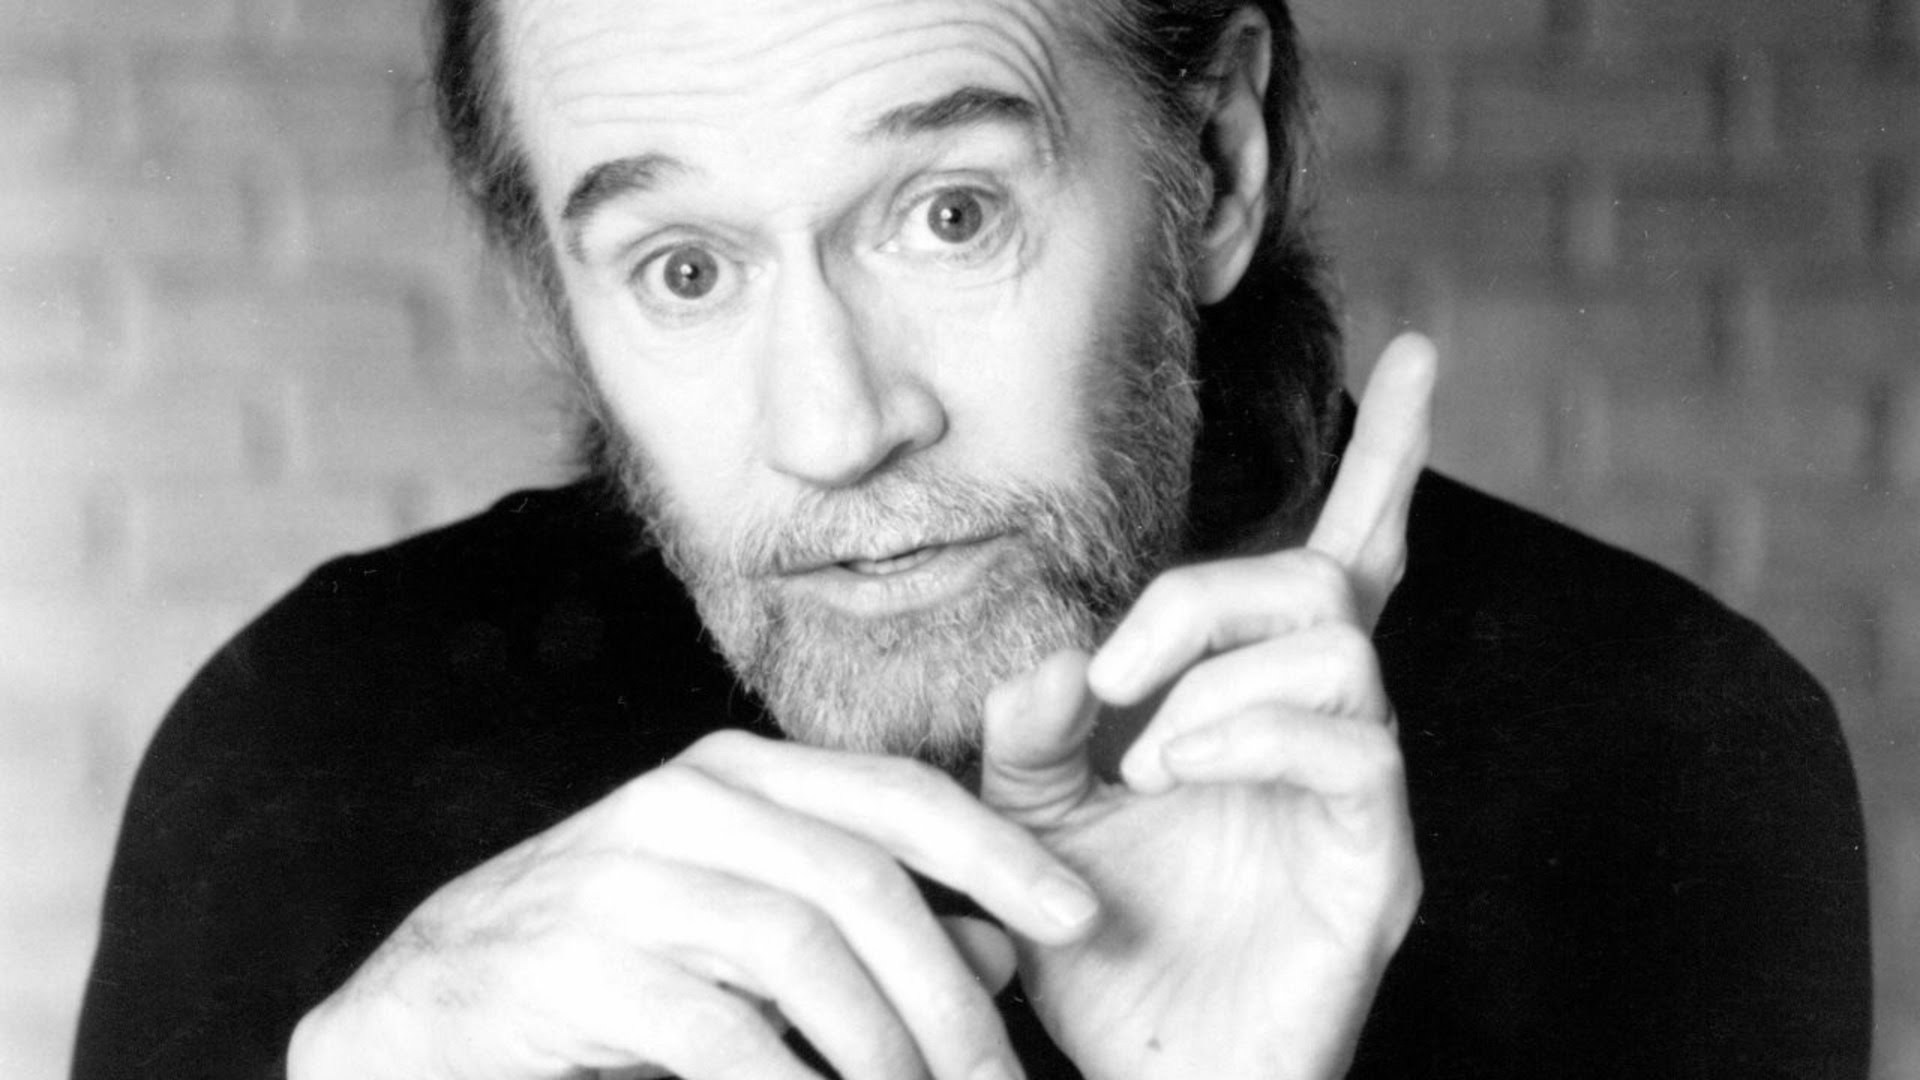 George Carlin: George Lester in the episode: "Break a Leg" of That Girl. 1920x1080 Full HD Background.